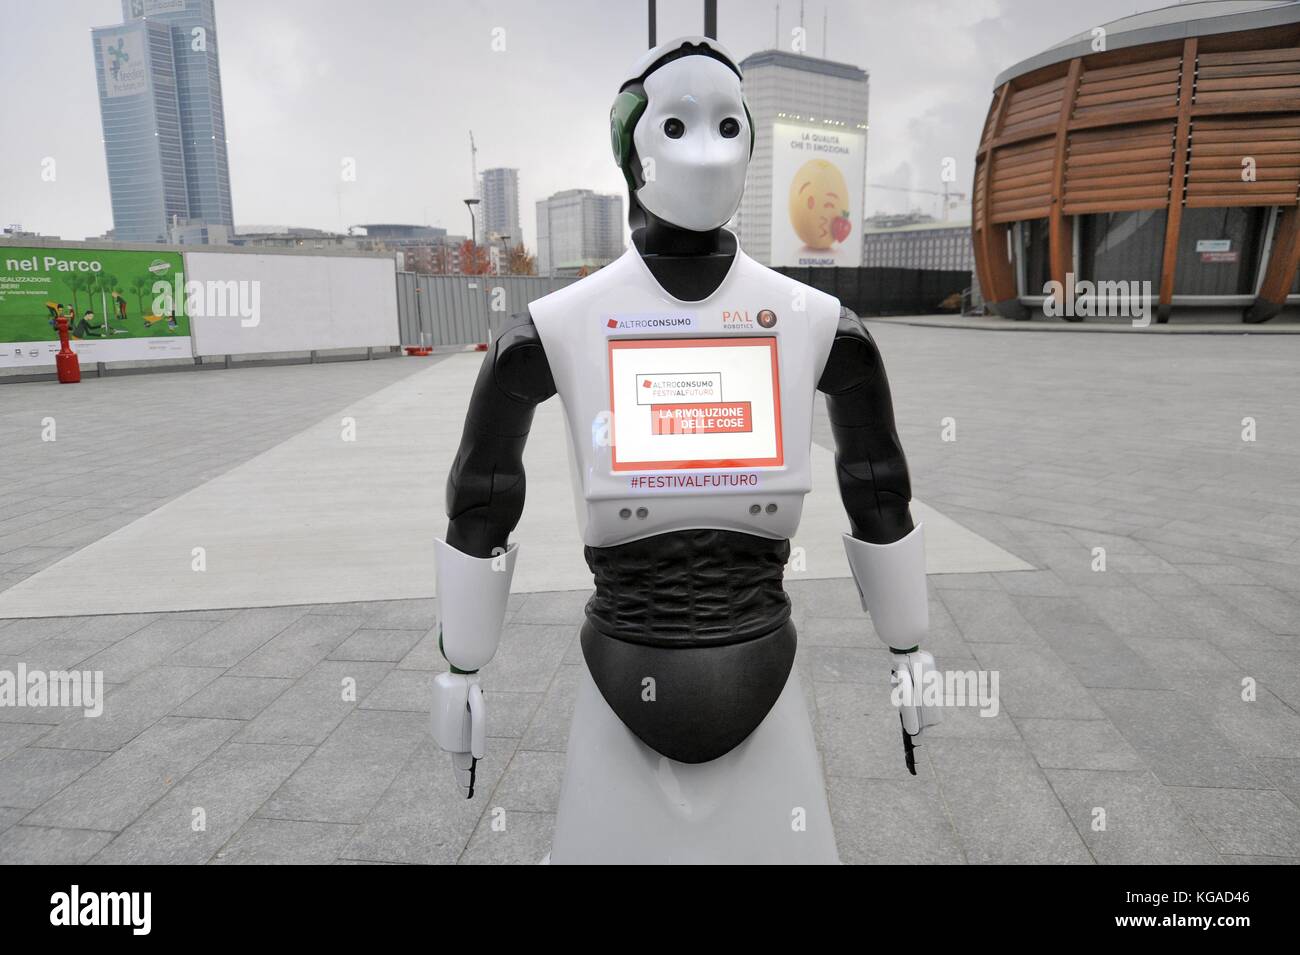 Milan (Italy), November 2017; for a few days the interactive robot Reem has  moved to various places in the city to promote an event organized by the  consumer association Altroconsumo dedicated to